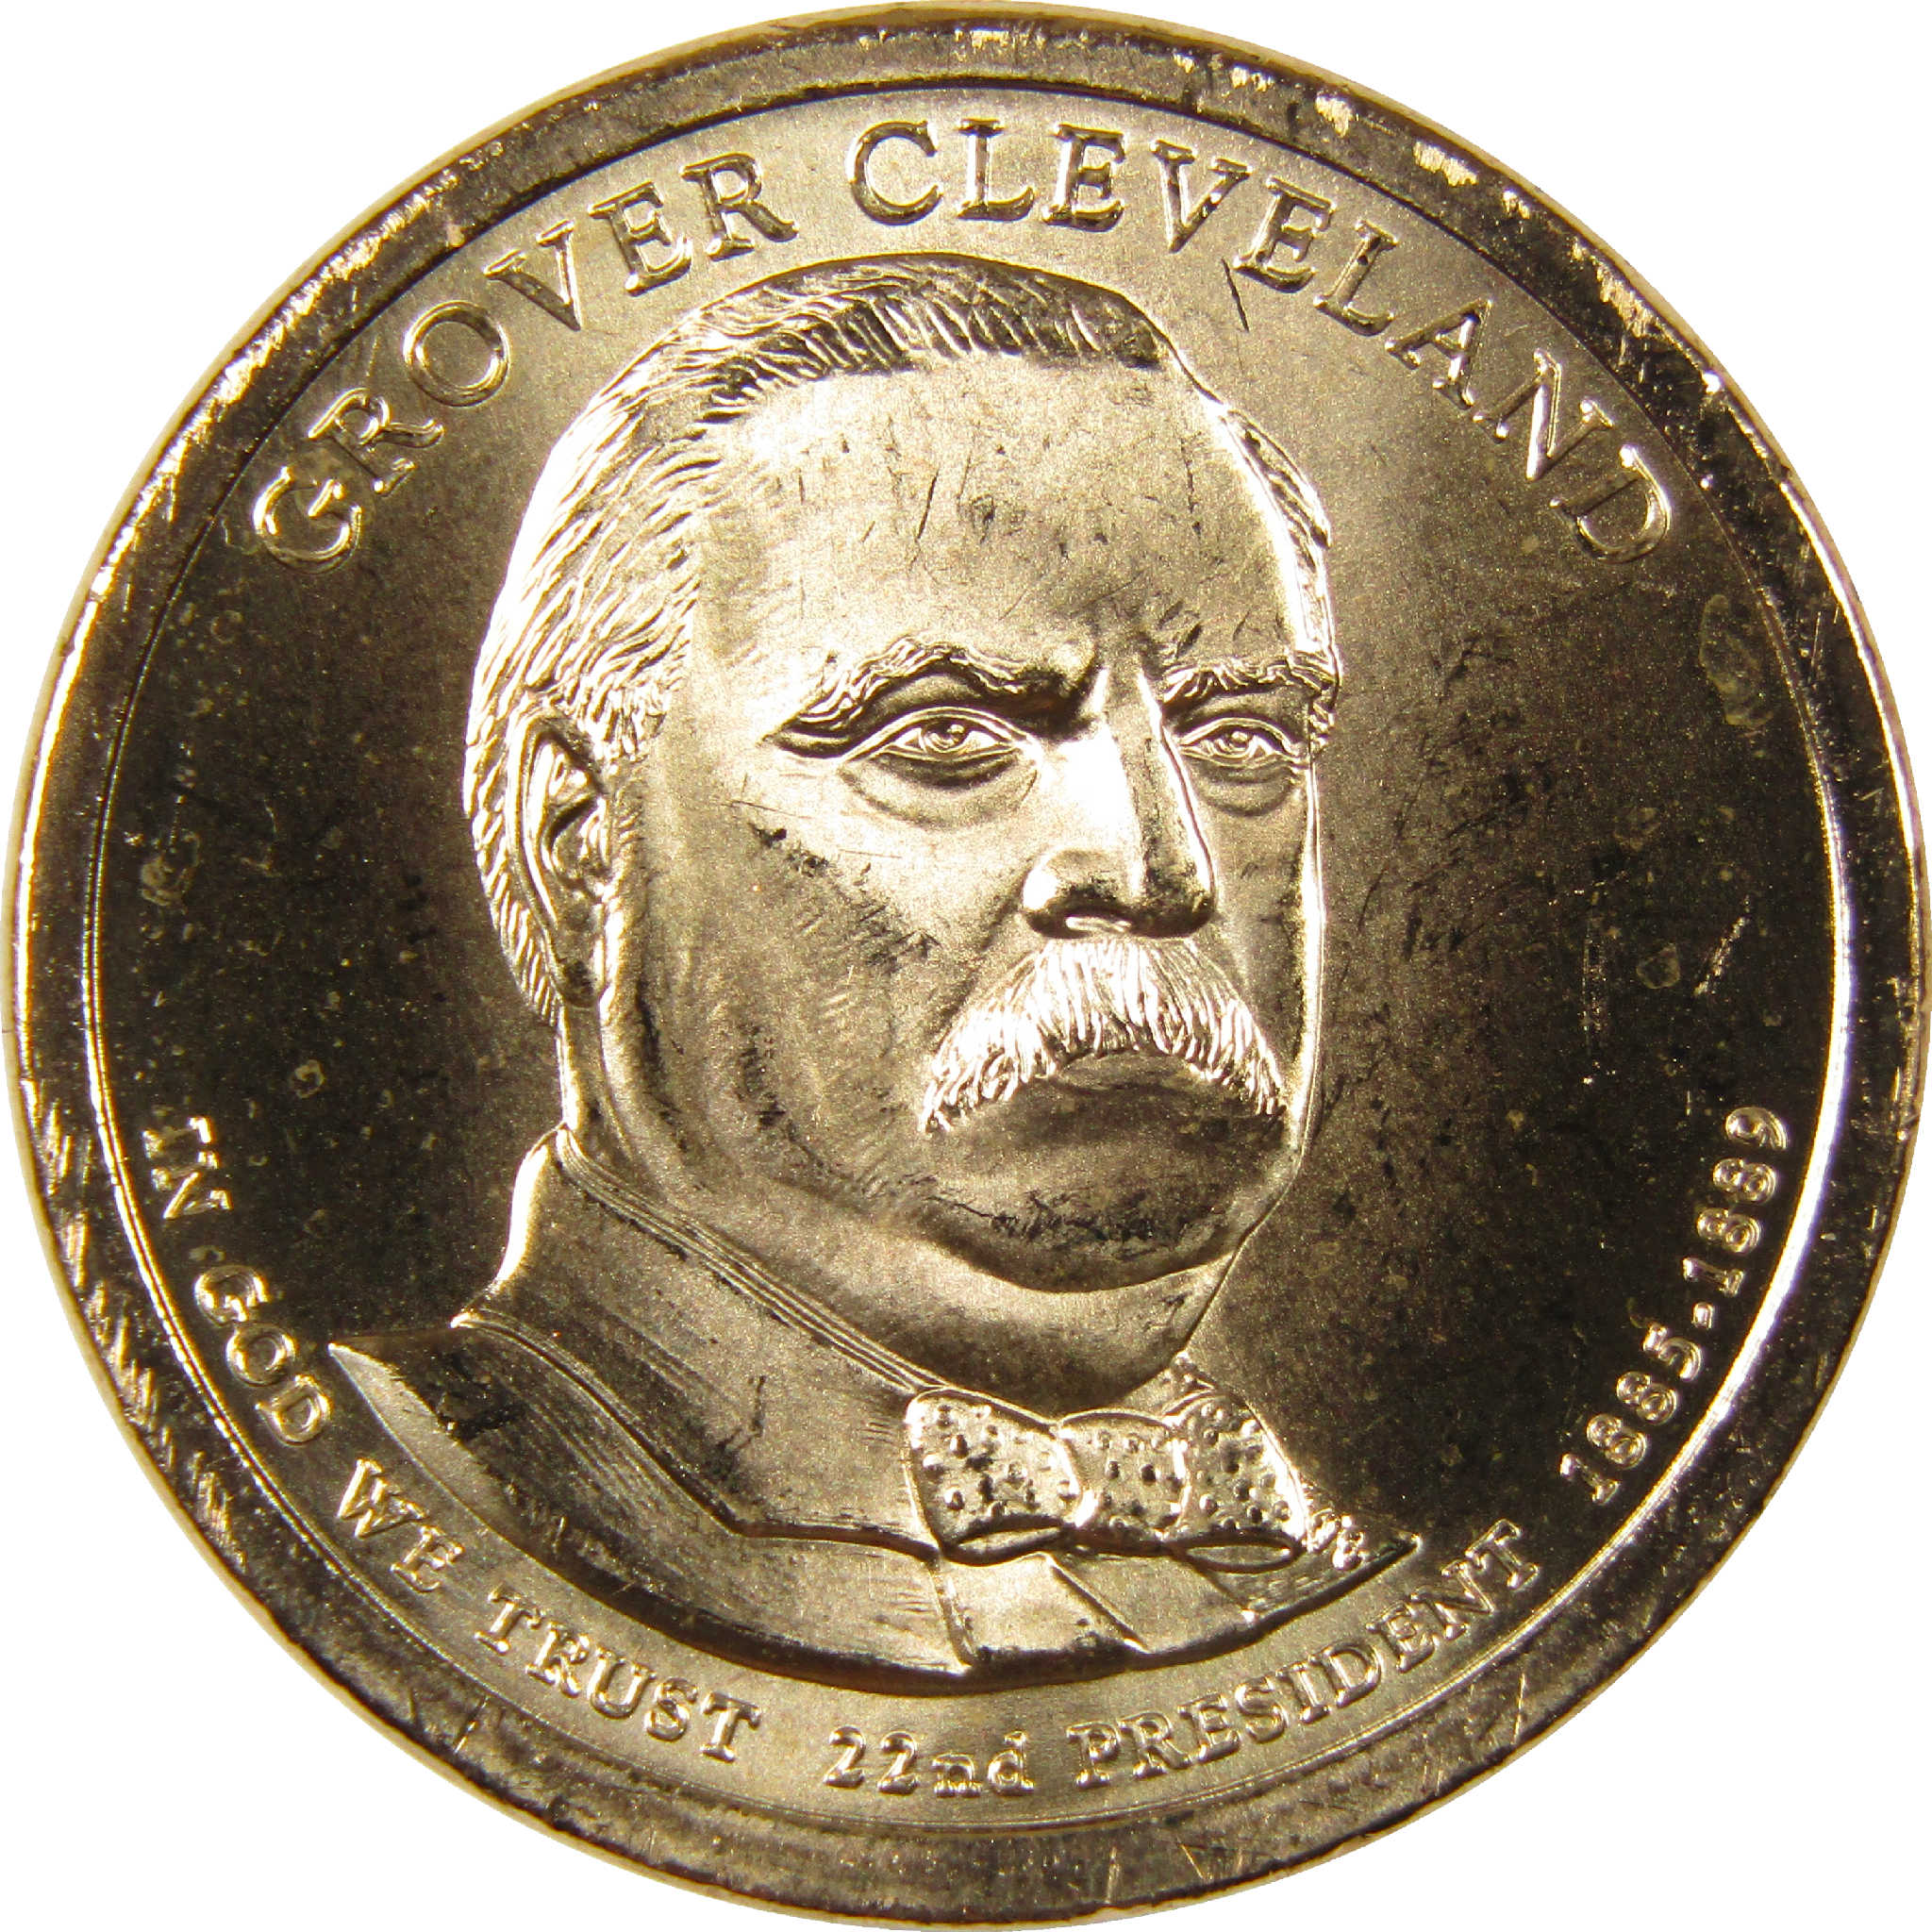 2012 P Grover Cleveland 1st Term Presidential Dollar Uncirculated $1